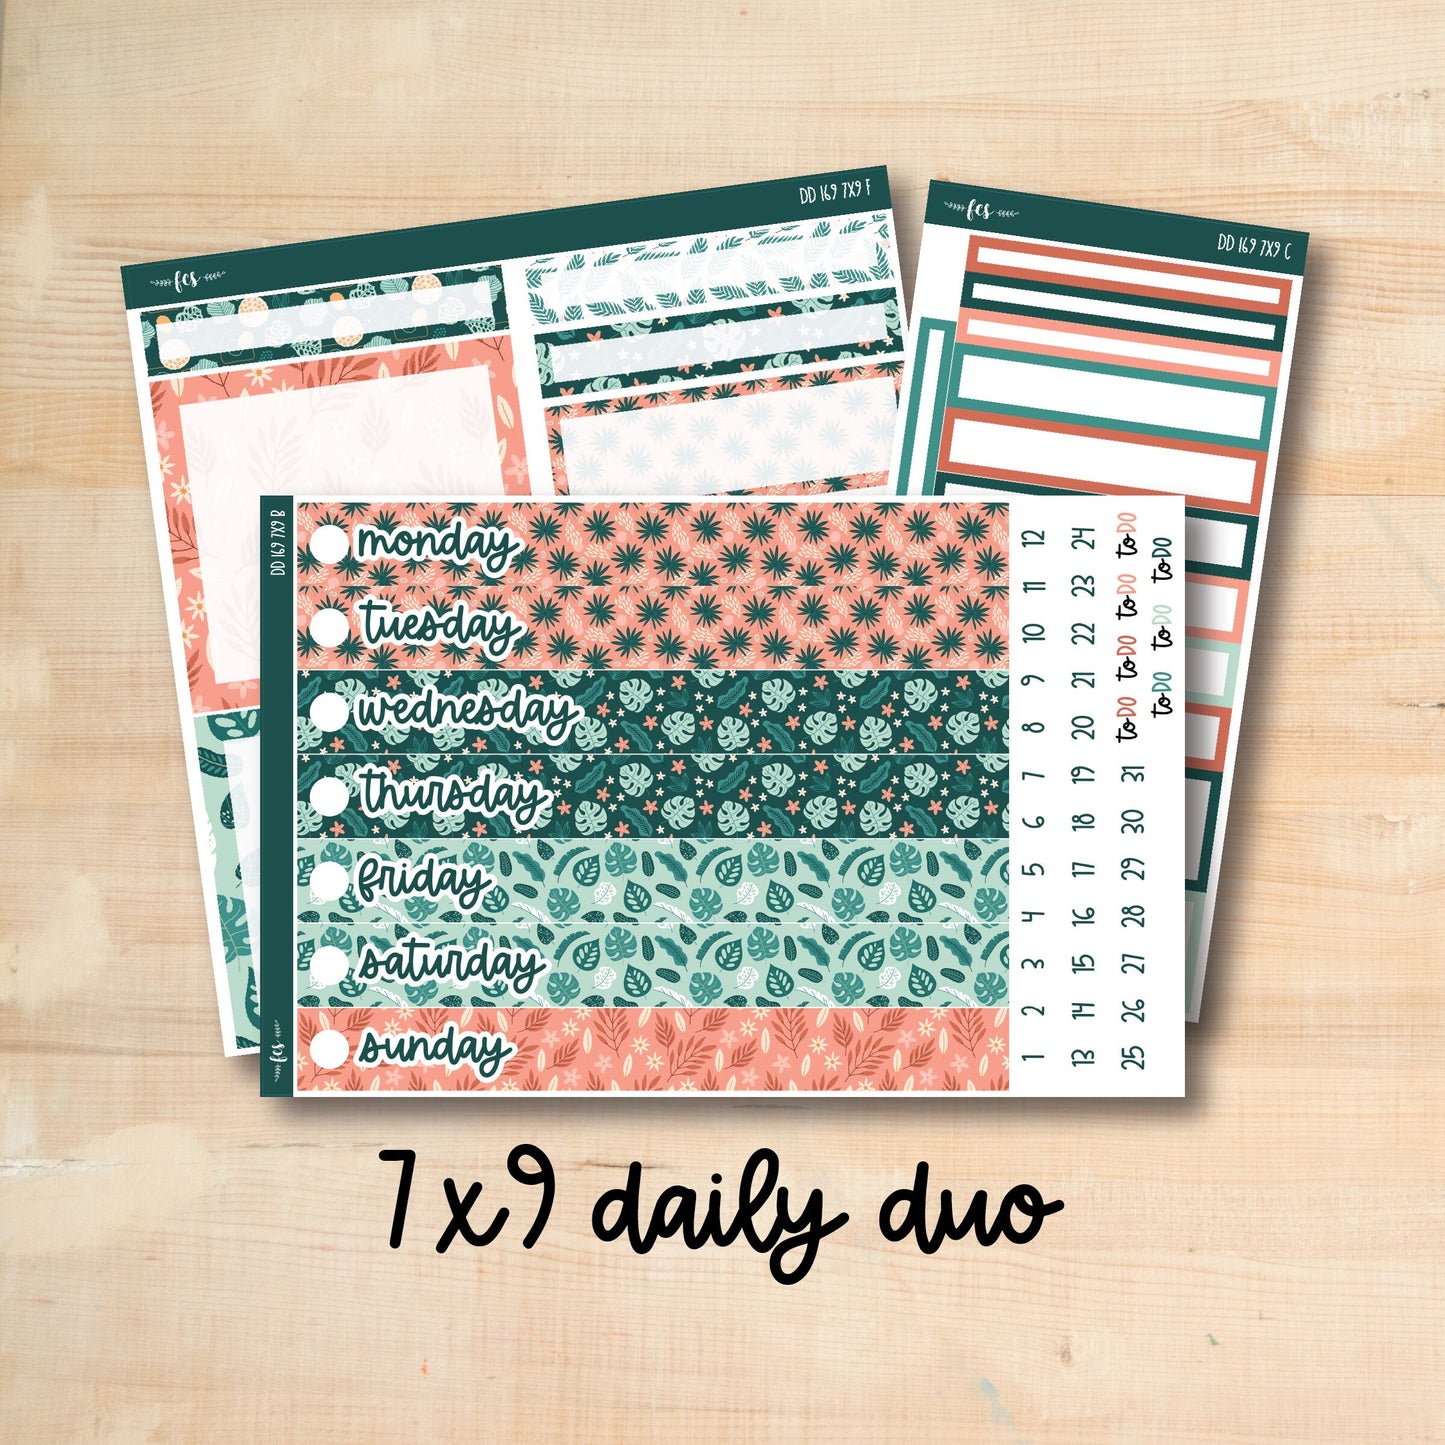 7x9 Daily Duo 169 || TROPICAL LEAVES 7x9 Daily Duo Kit